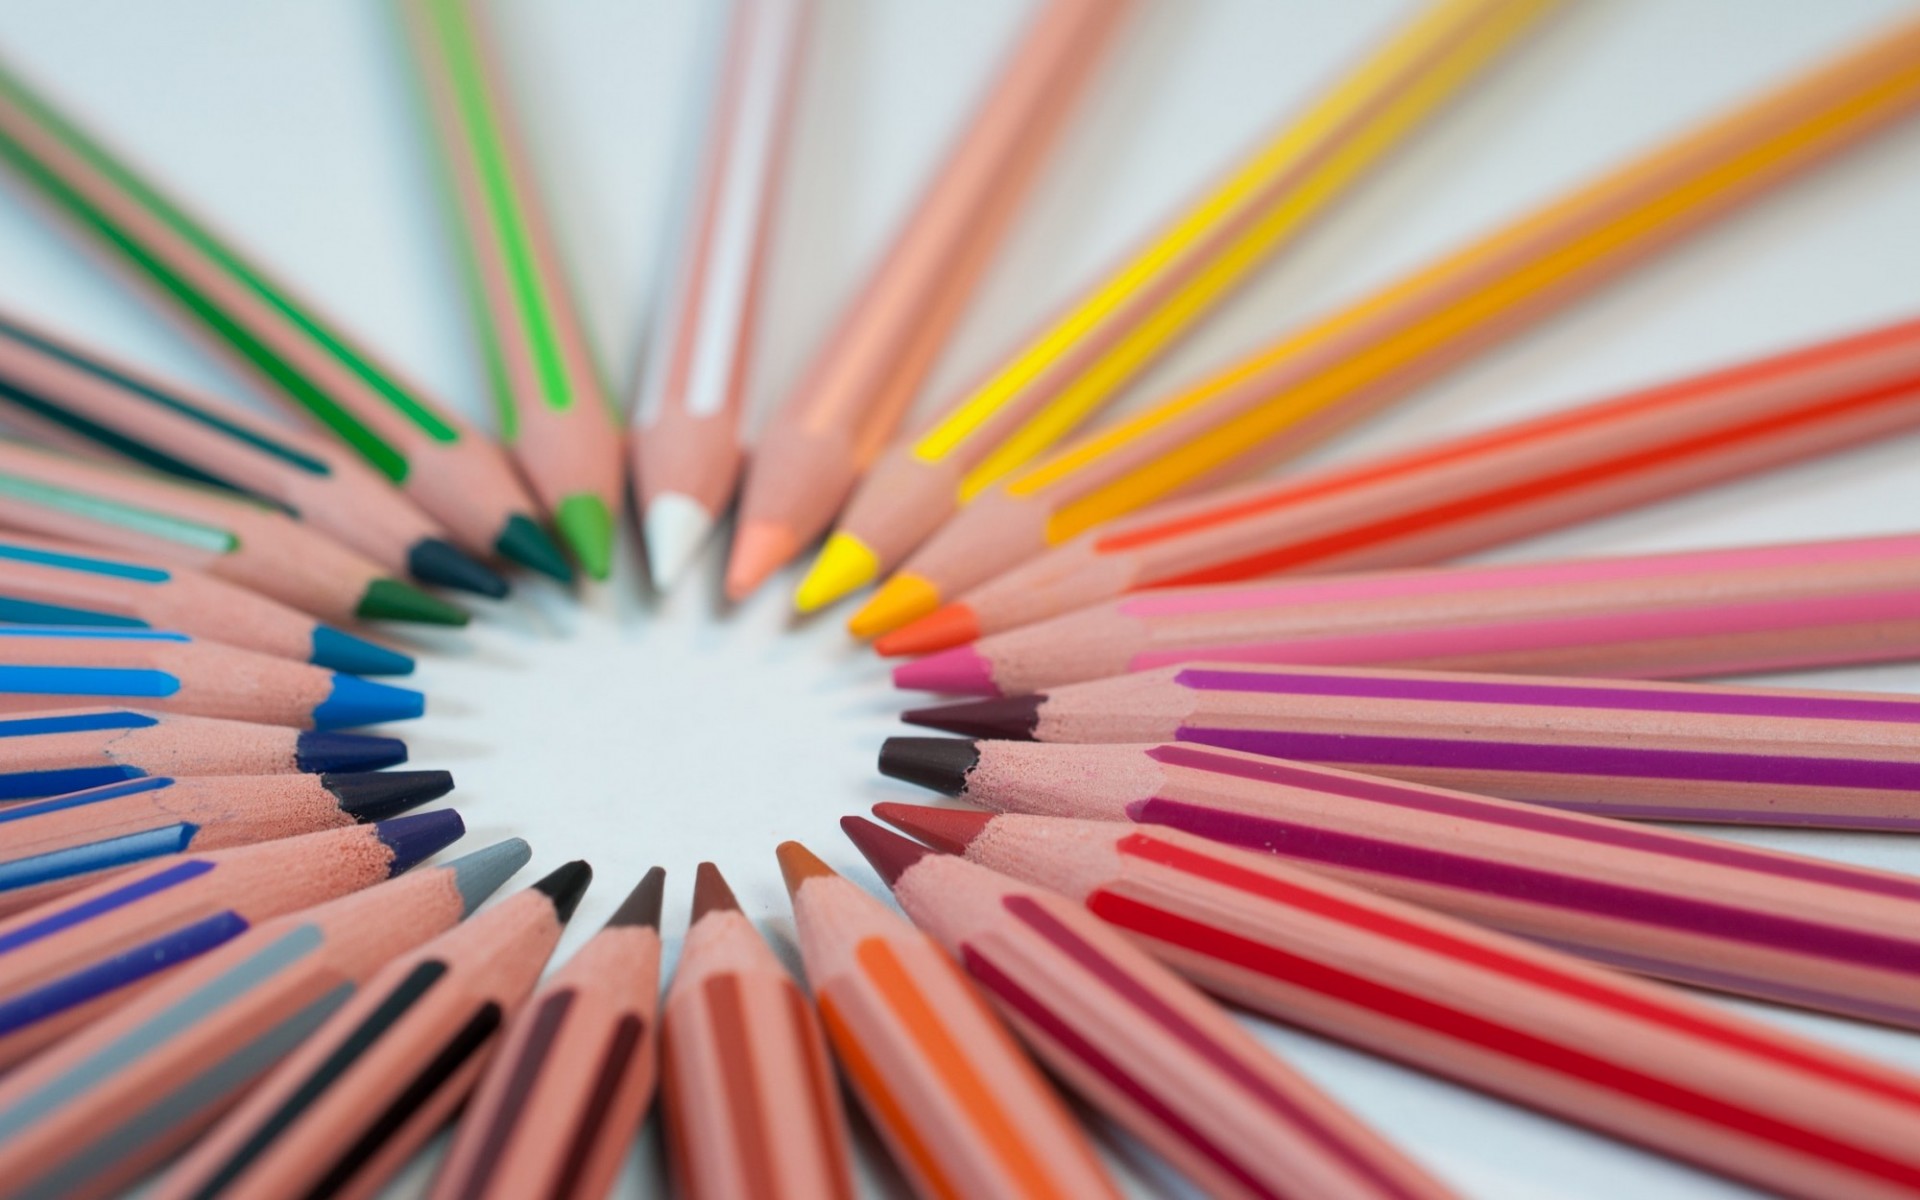 Colorful pencils in a circle